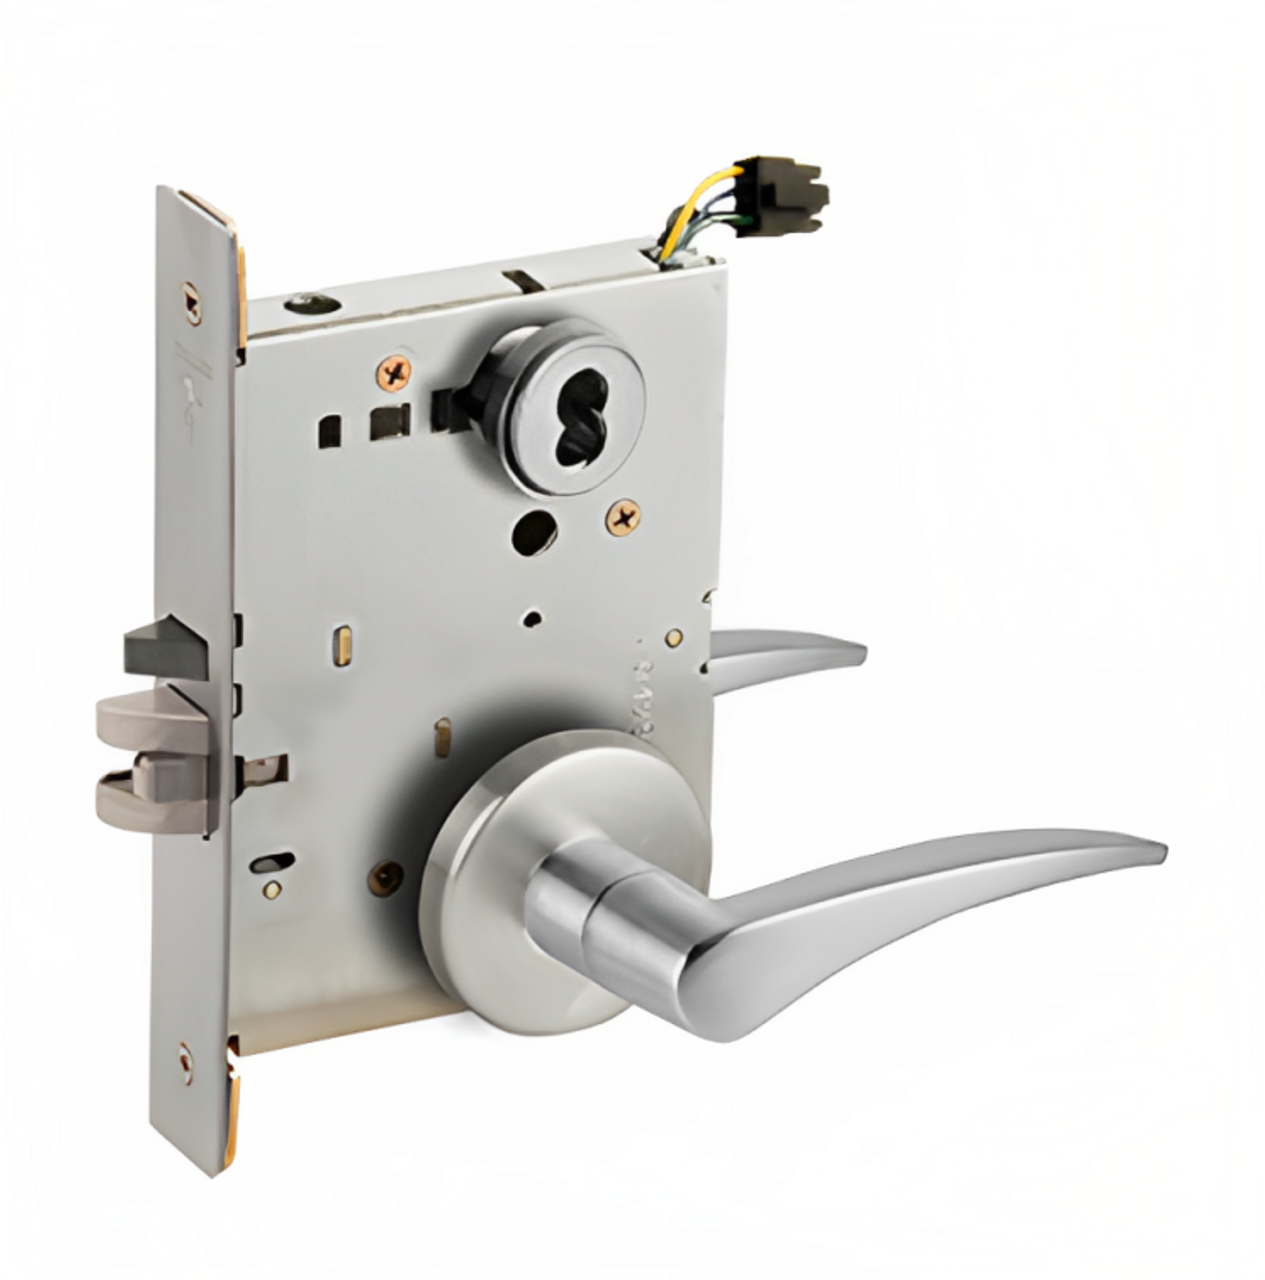 Schlage L9092 Mortise Lock, Electrically lock/unlock outside lever W/ Cylinder outside